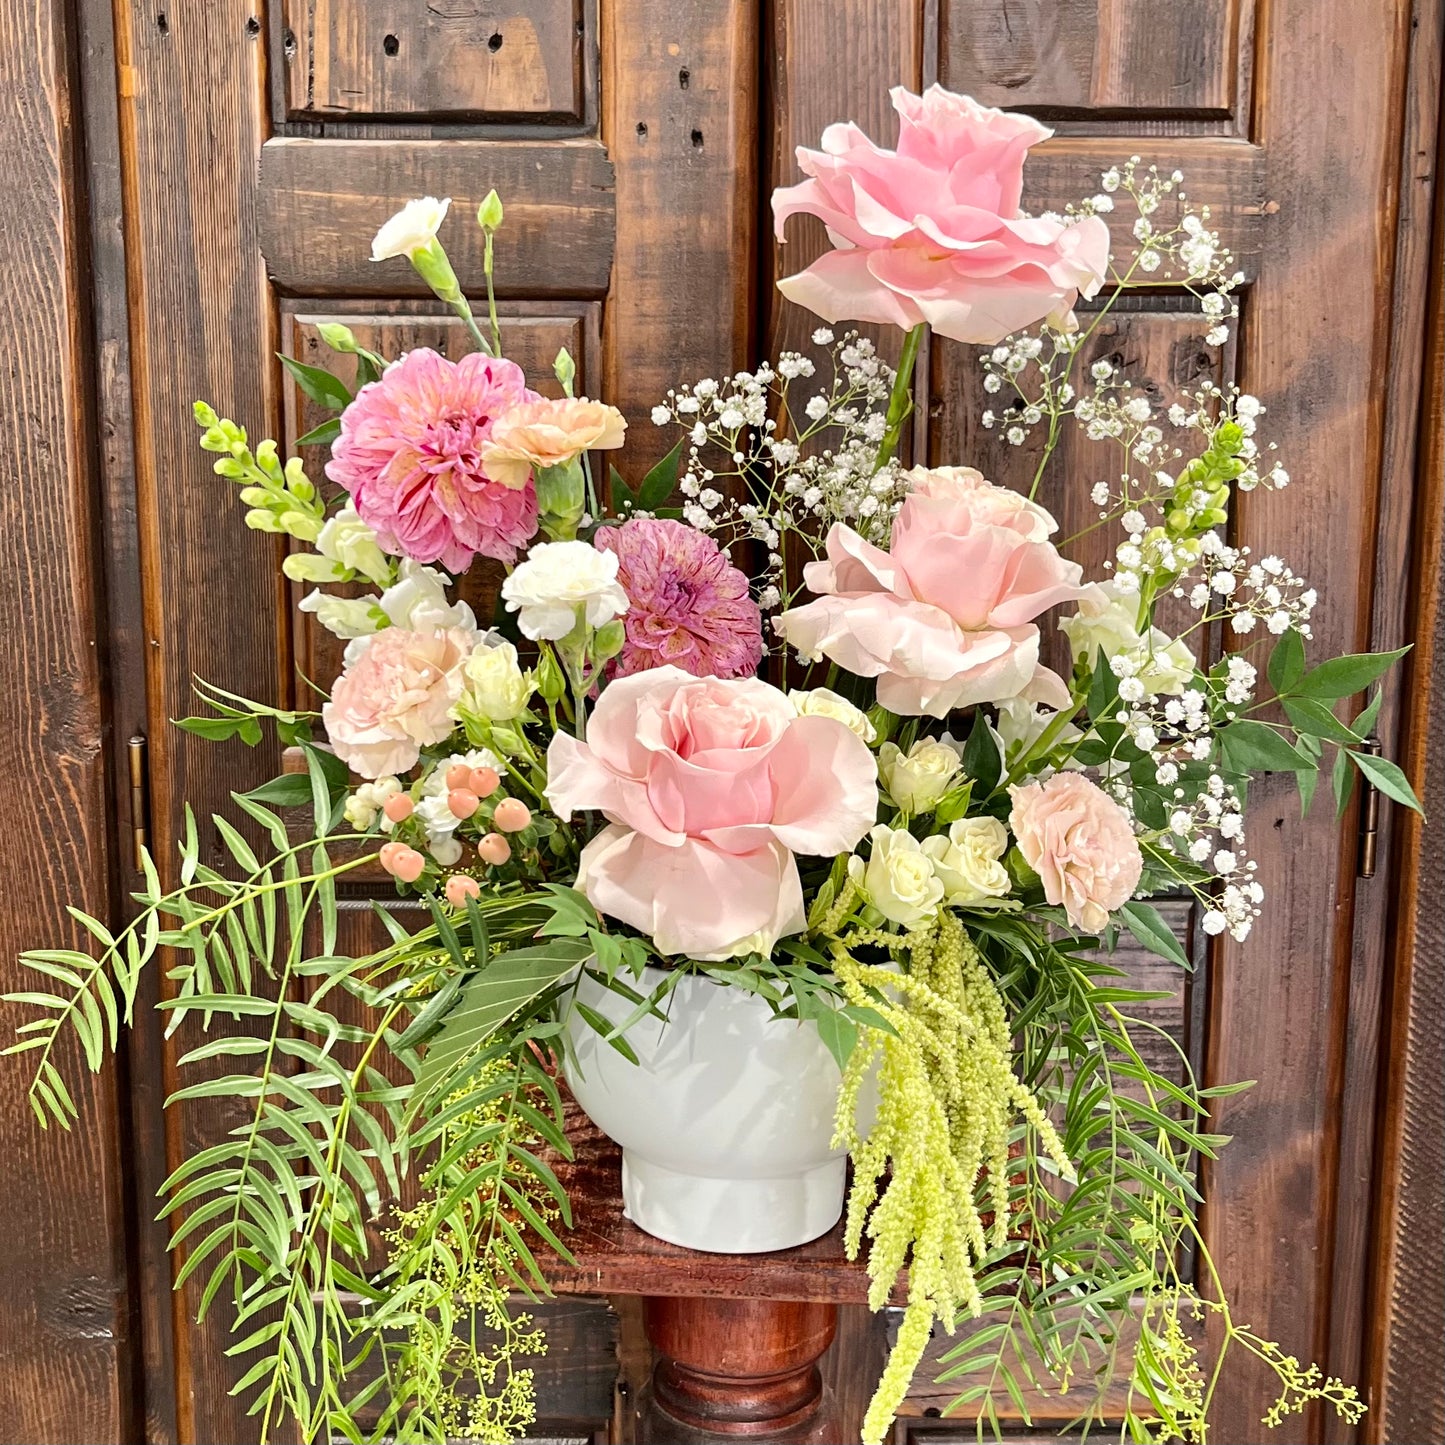 Experience the romance of #bridgerton with "Bridgerton Blooms" Flowers inspired by the romance series.